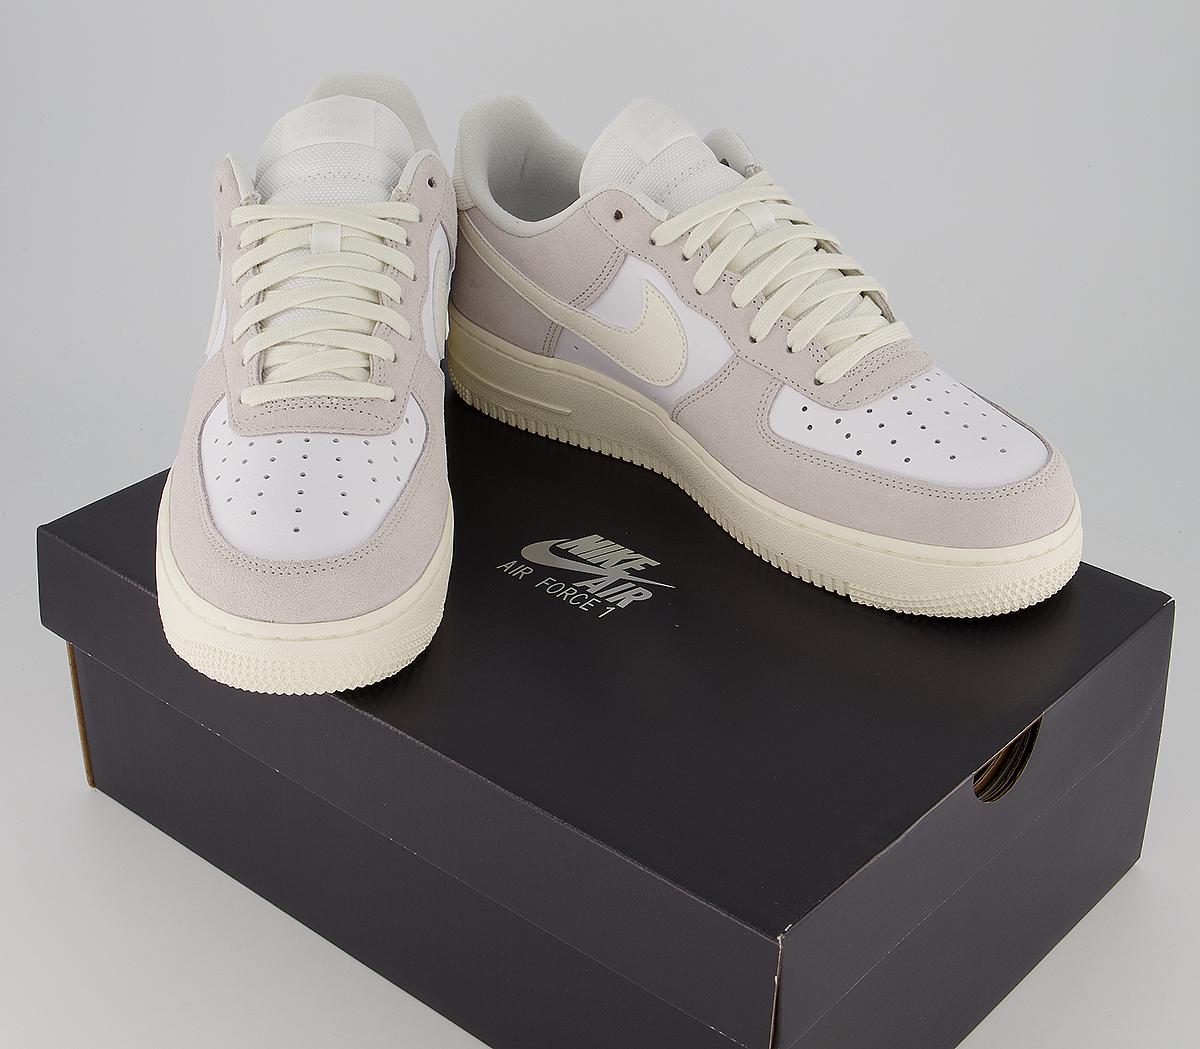 Nike Air Force 1 Lv8 Trainers White Sail Platinum Tint - His trainers